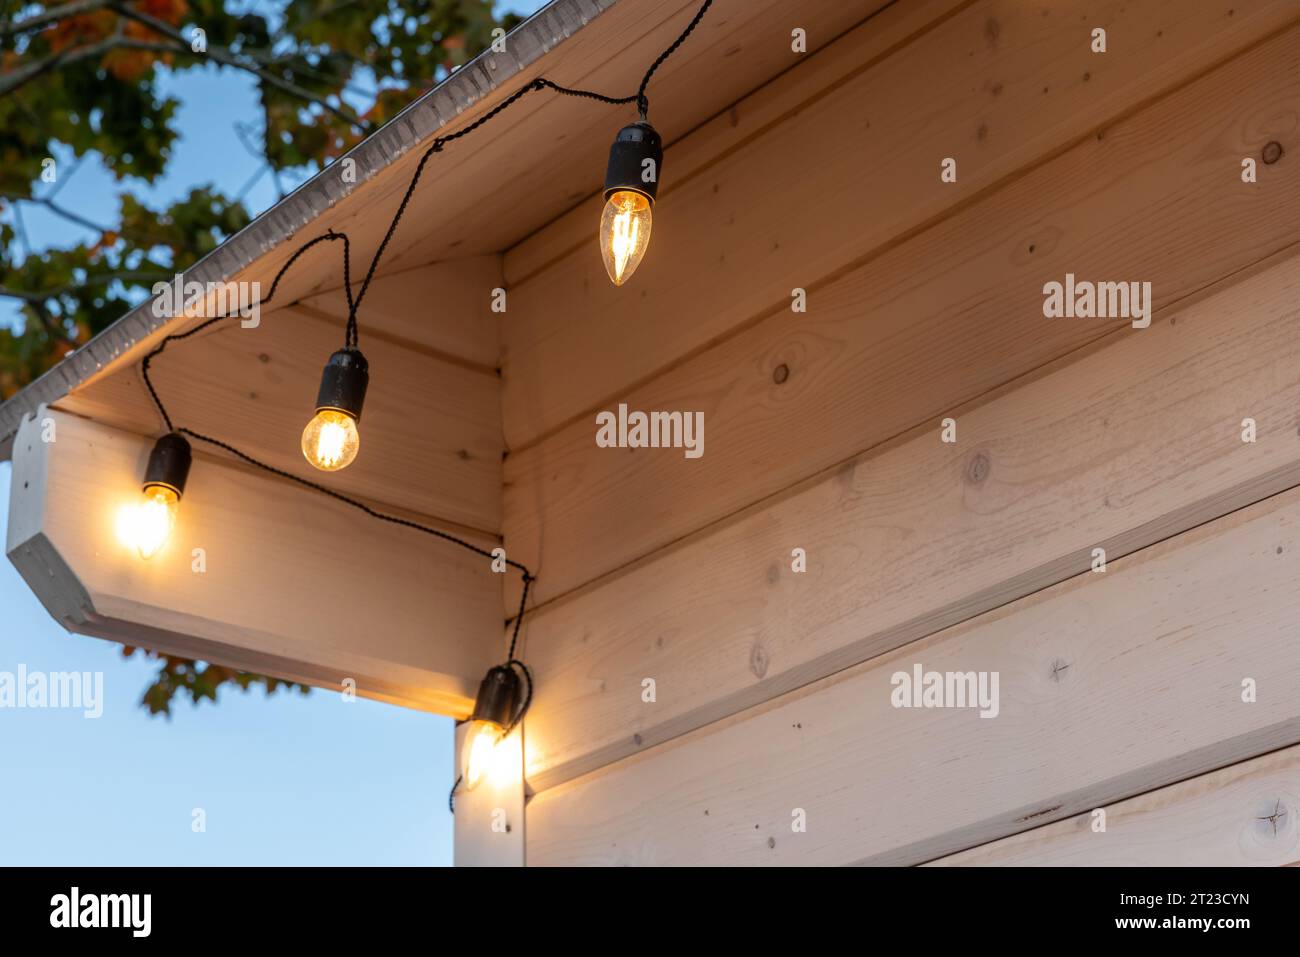 Garland of light bulbs hanging on a wooden house, close up Stock Photo